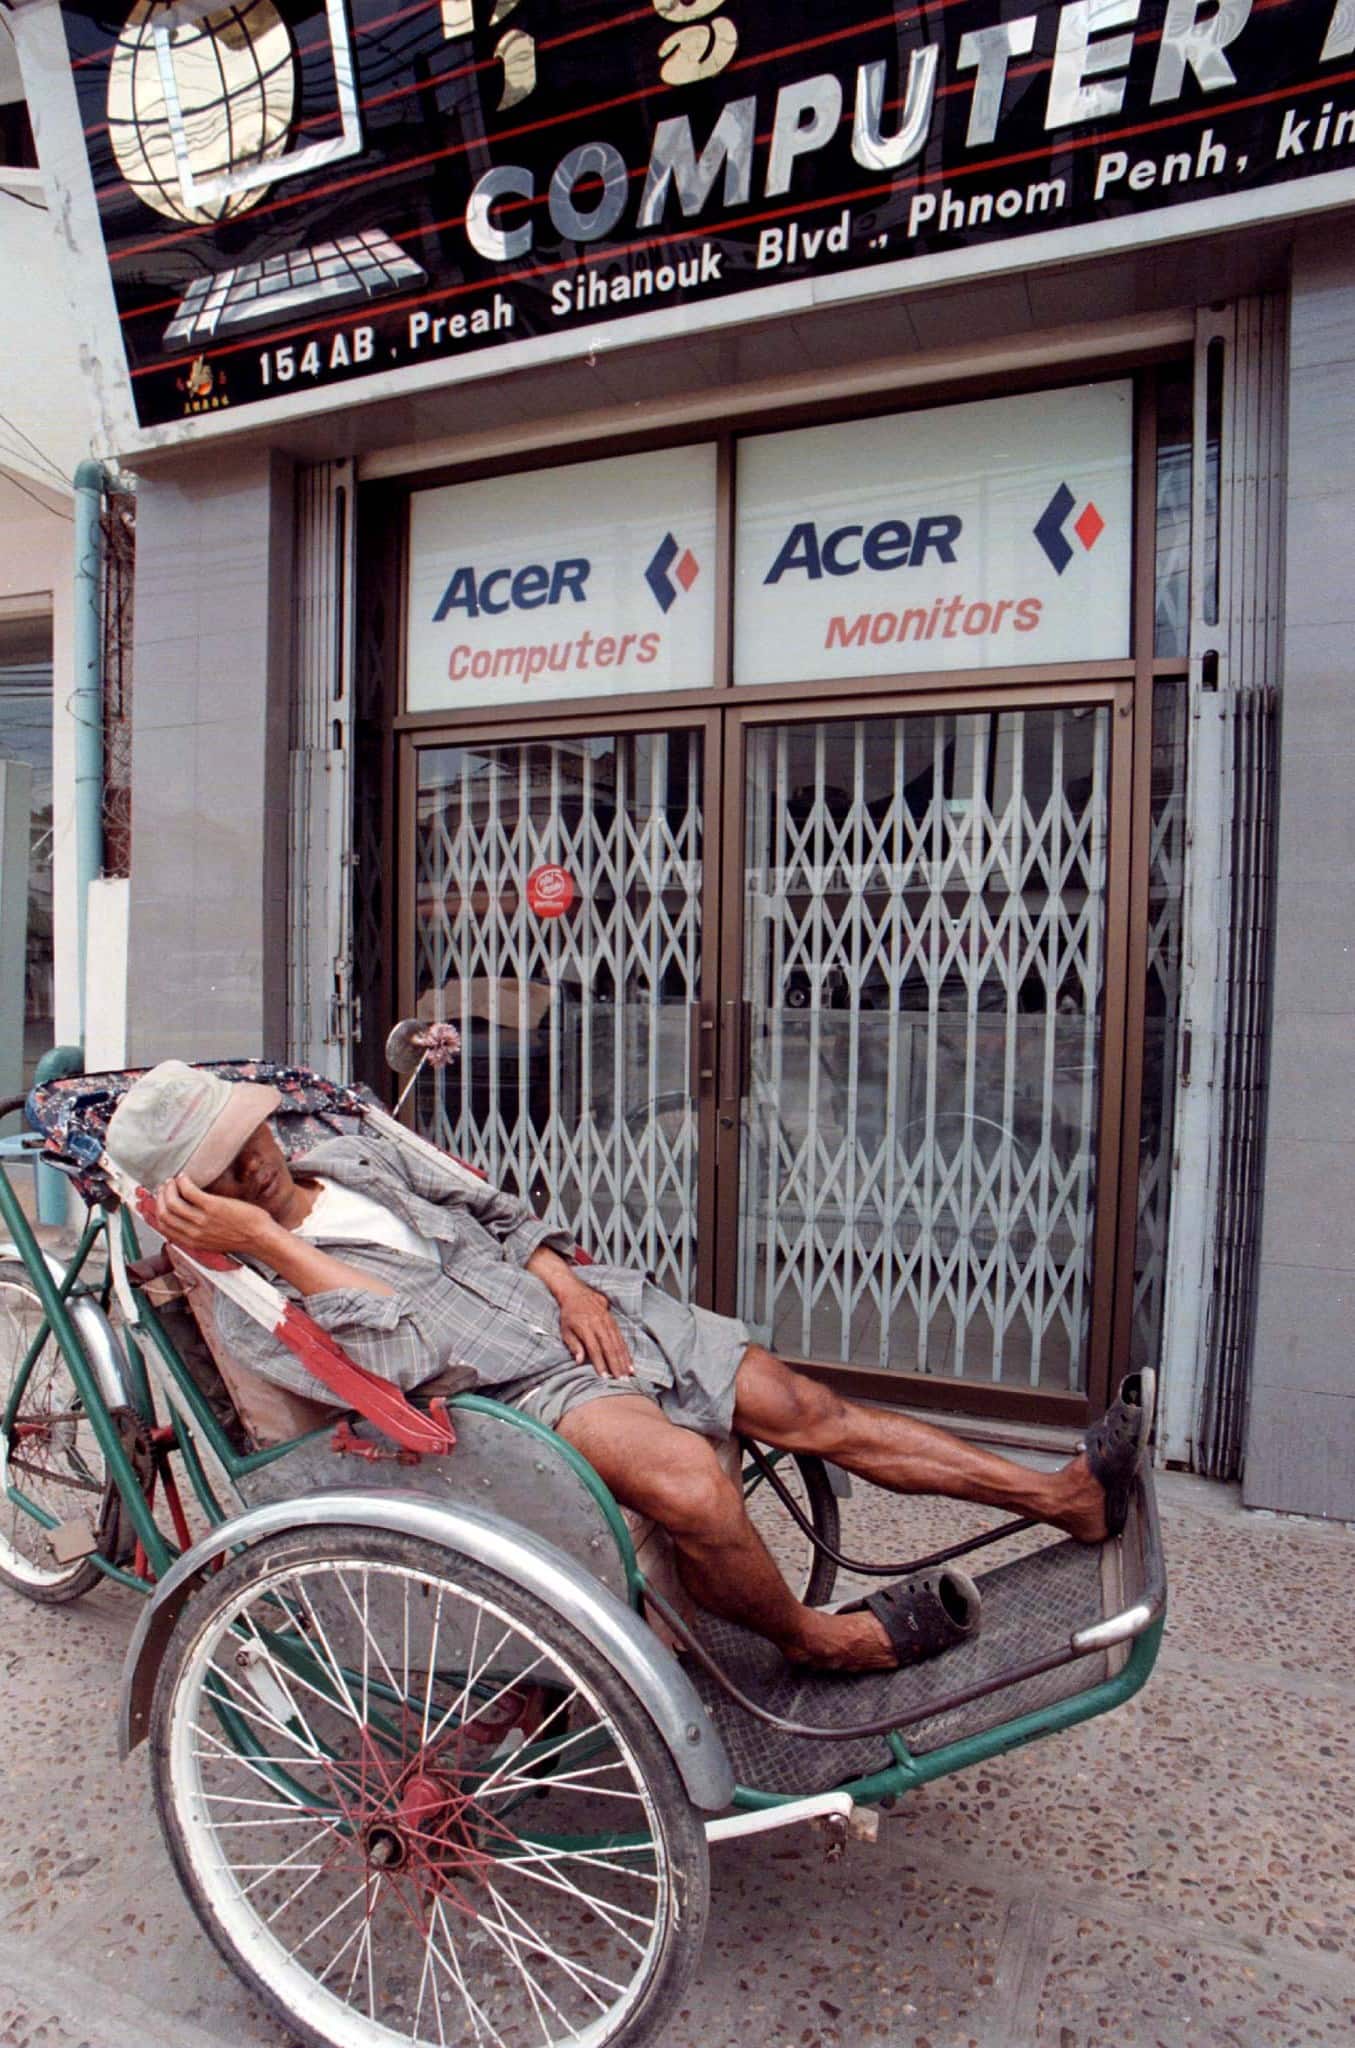 A Cambodian cyclo-driver sleeps outside a computer shop in Phnom Penh, Reuters